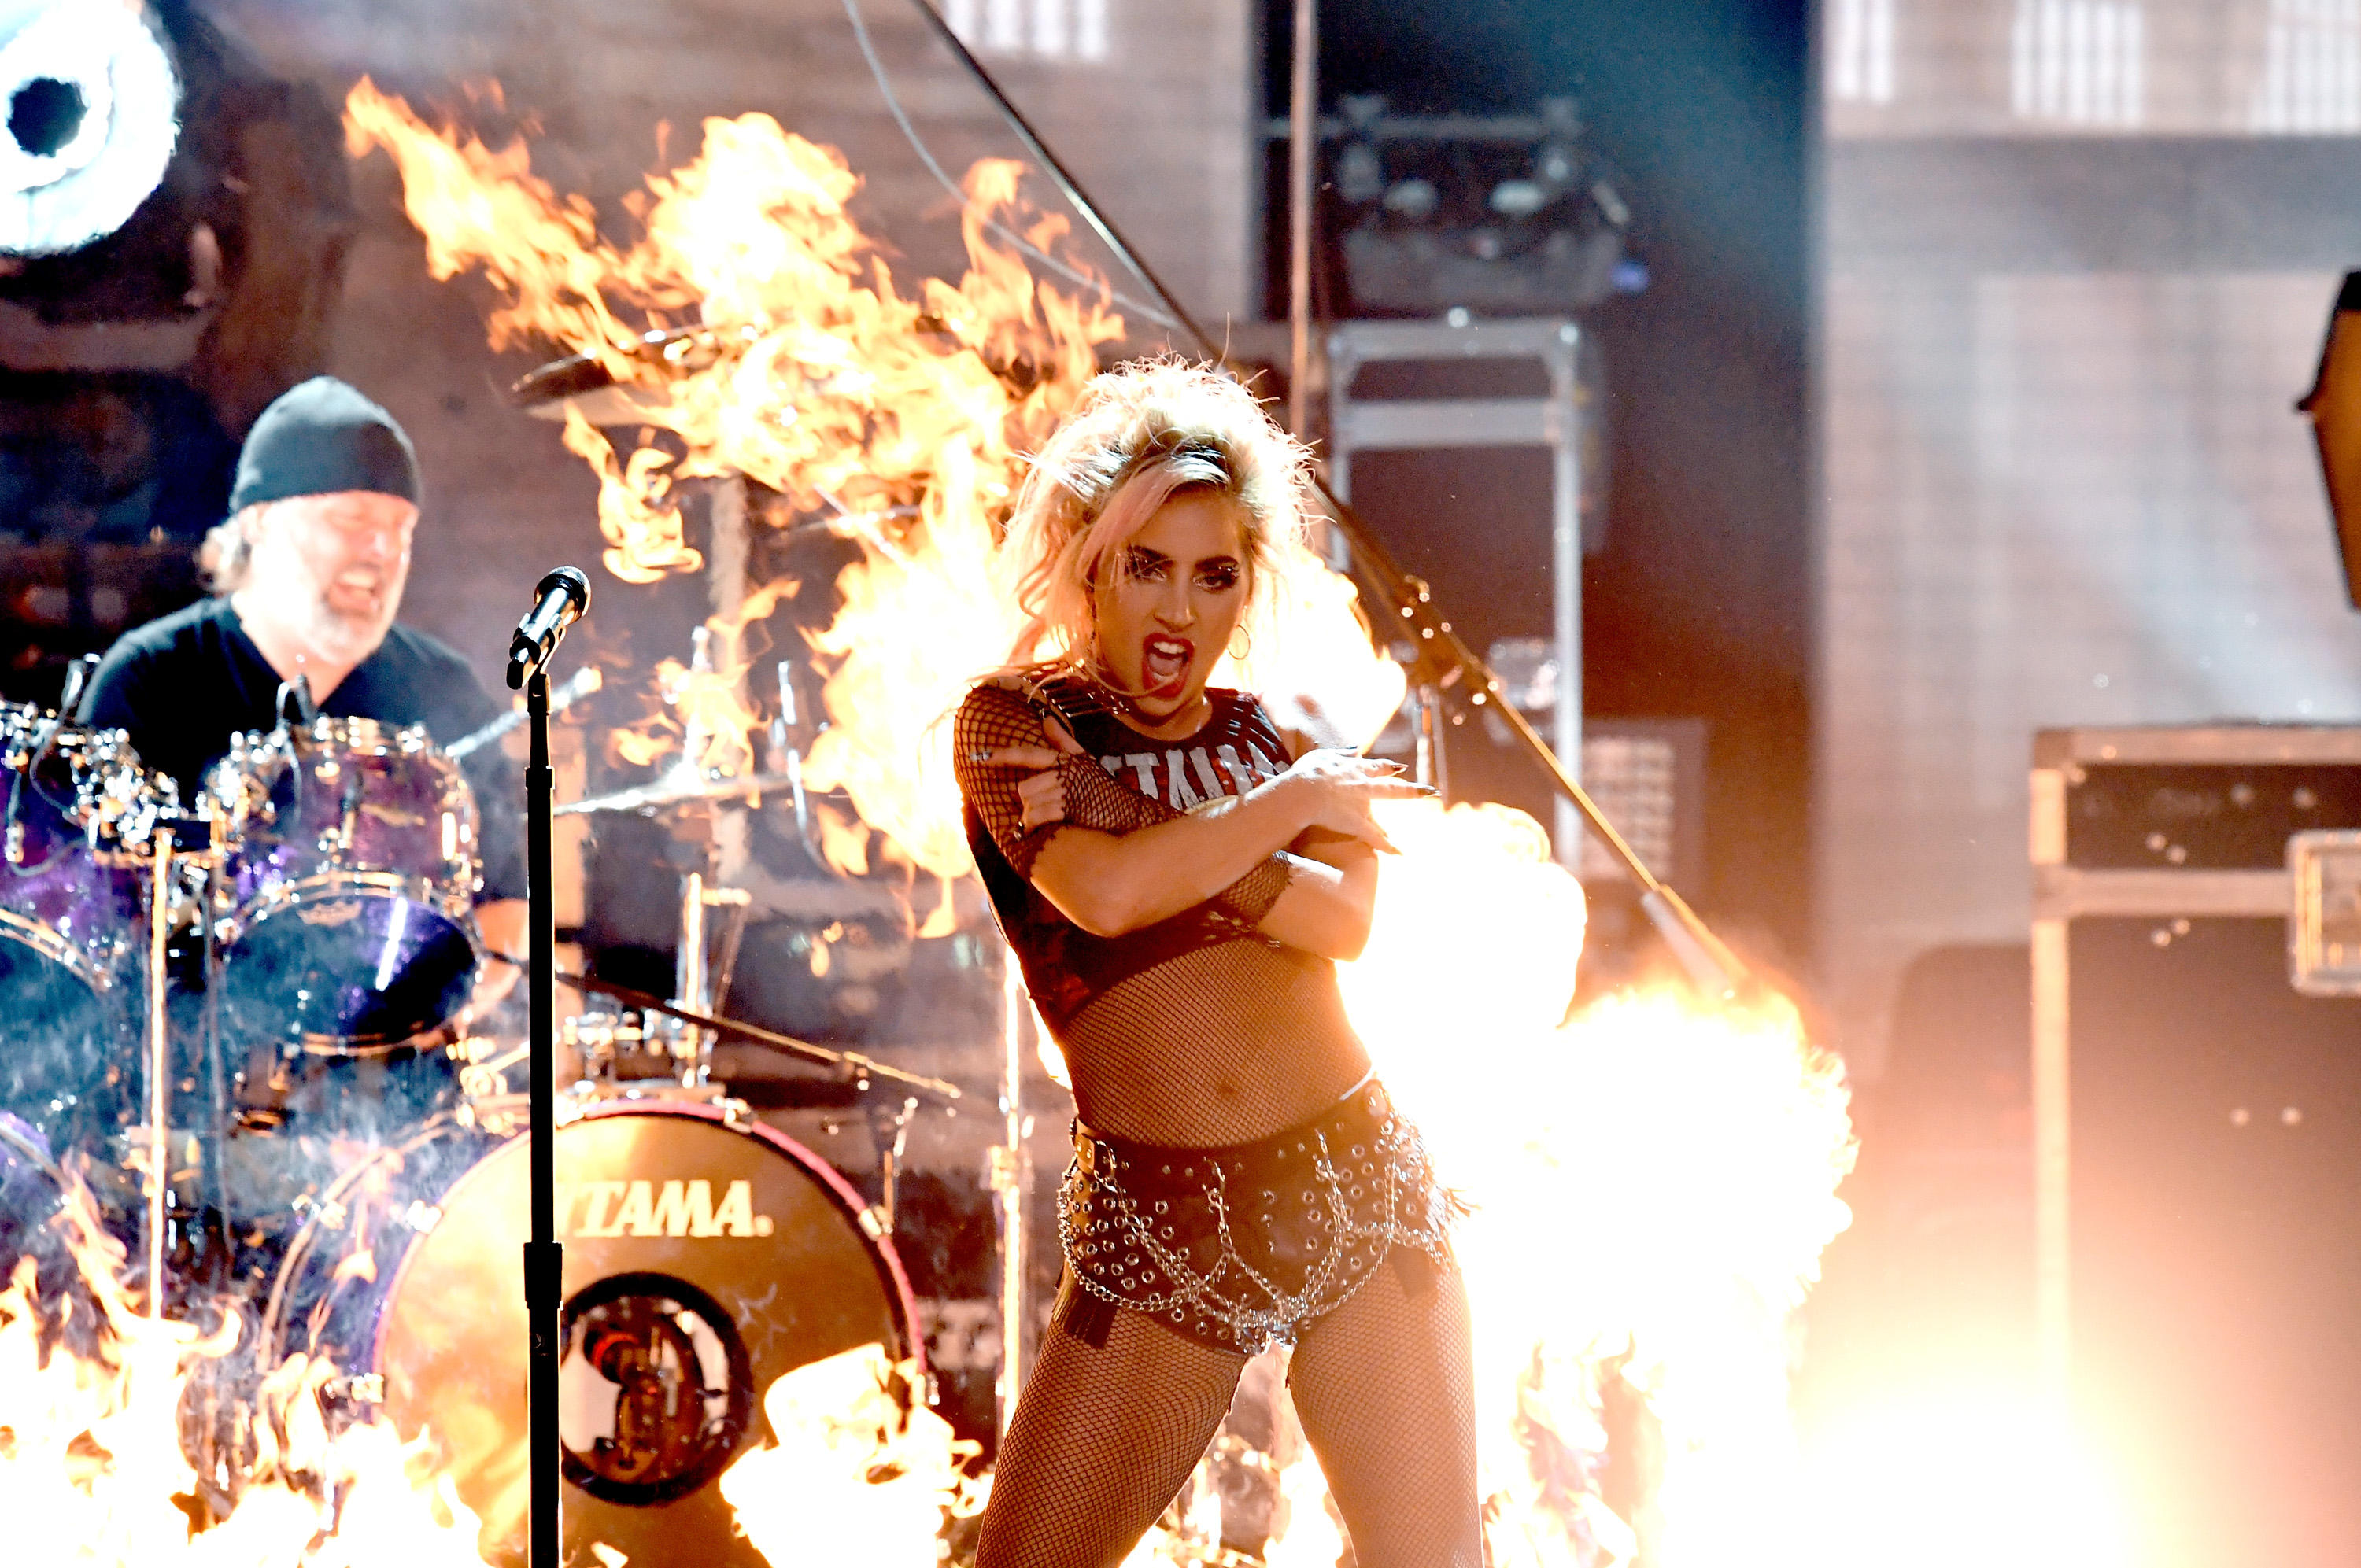 Lady Gaga makes history as first female headliner in a decade at